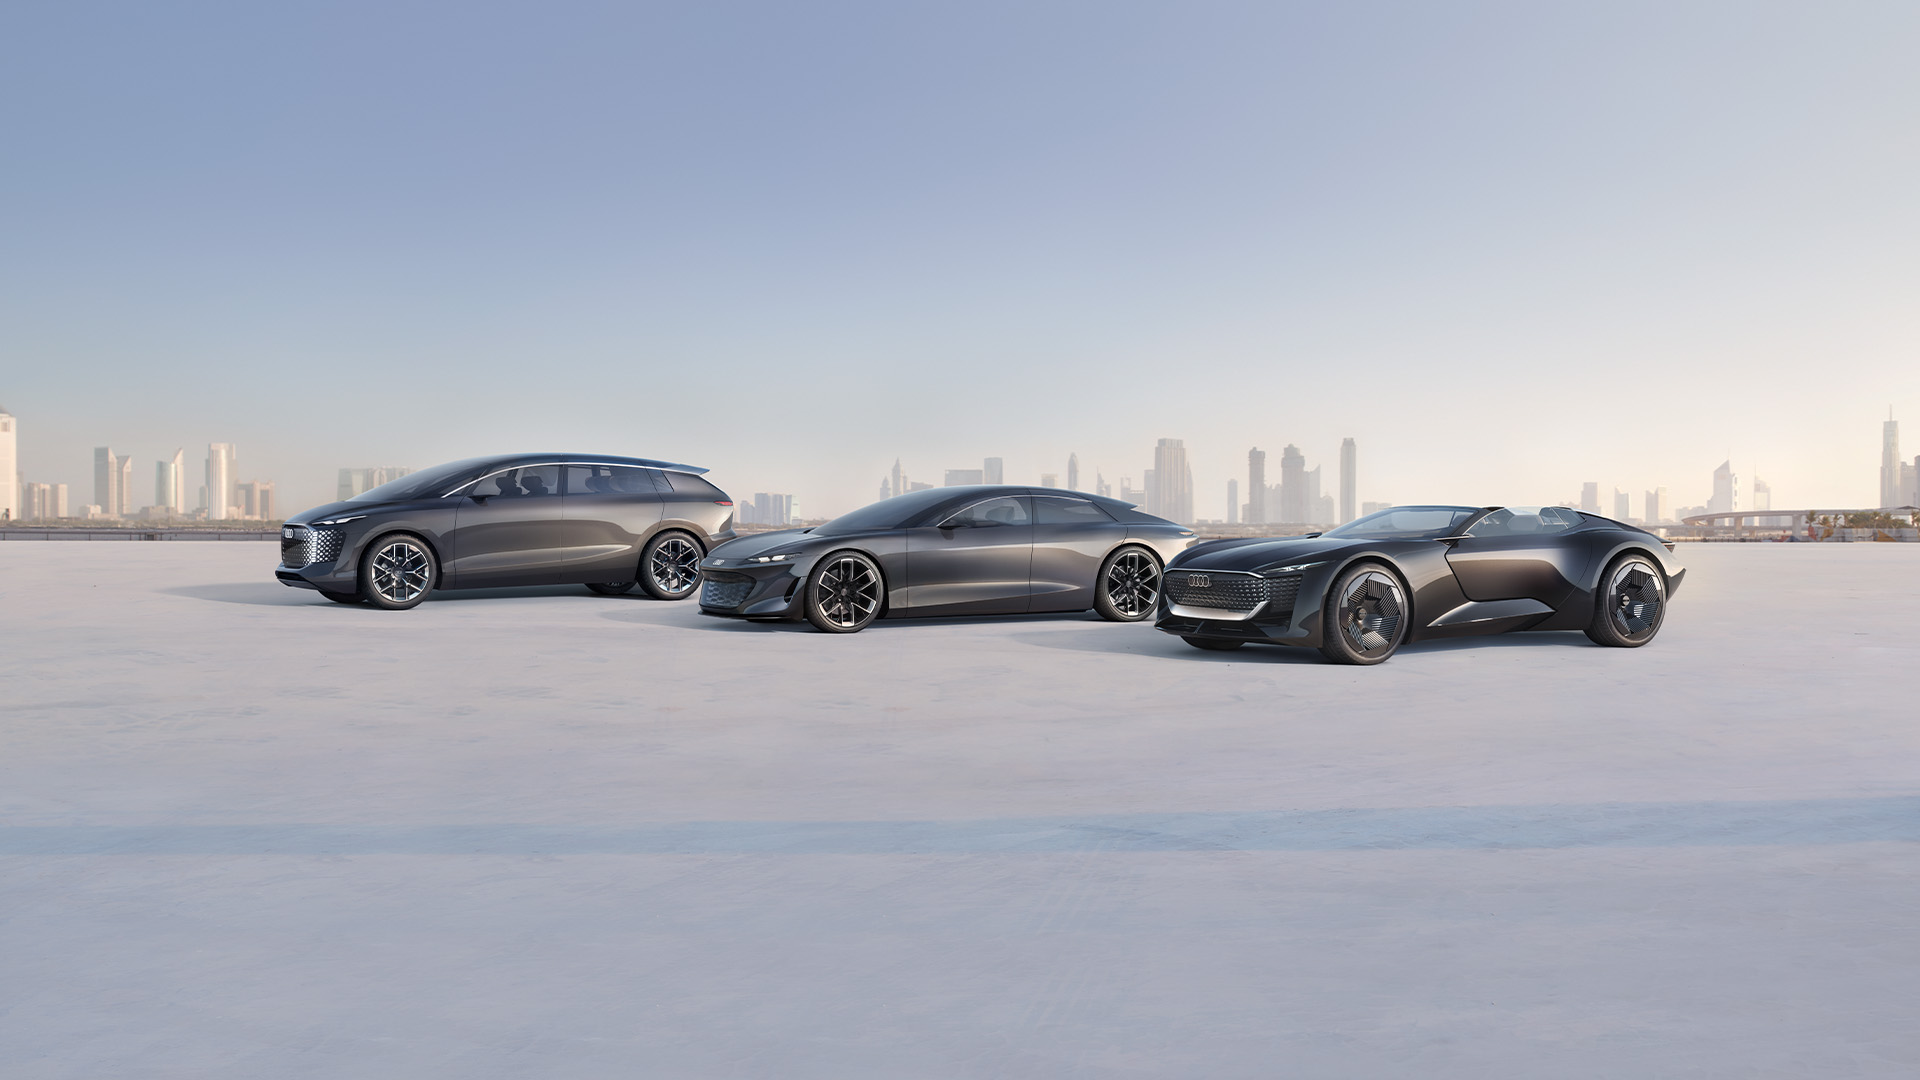 The Audi Sphere concepts at a glance